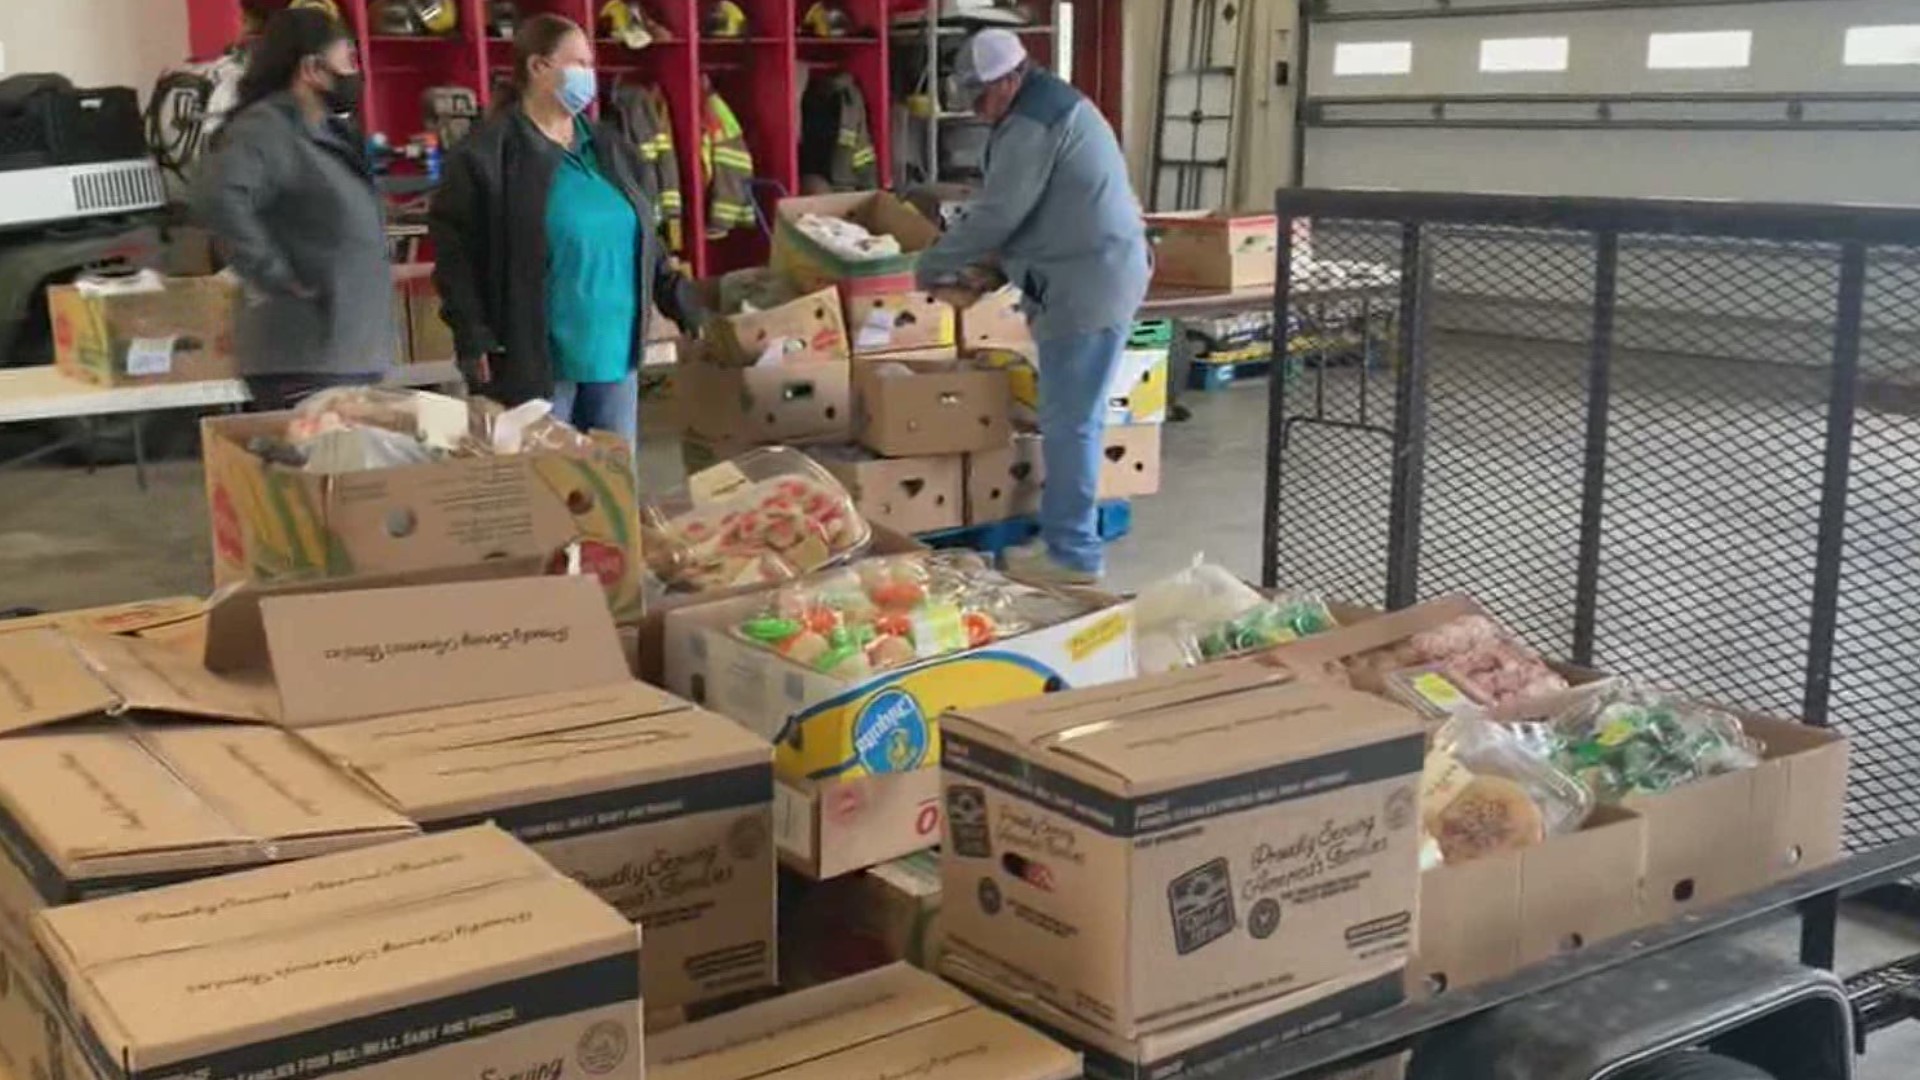 The food bank has delivered seven million pounds of food to 182,000 homes in the Coastal Bend. However, organizers say their work is still not done.